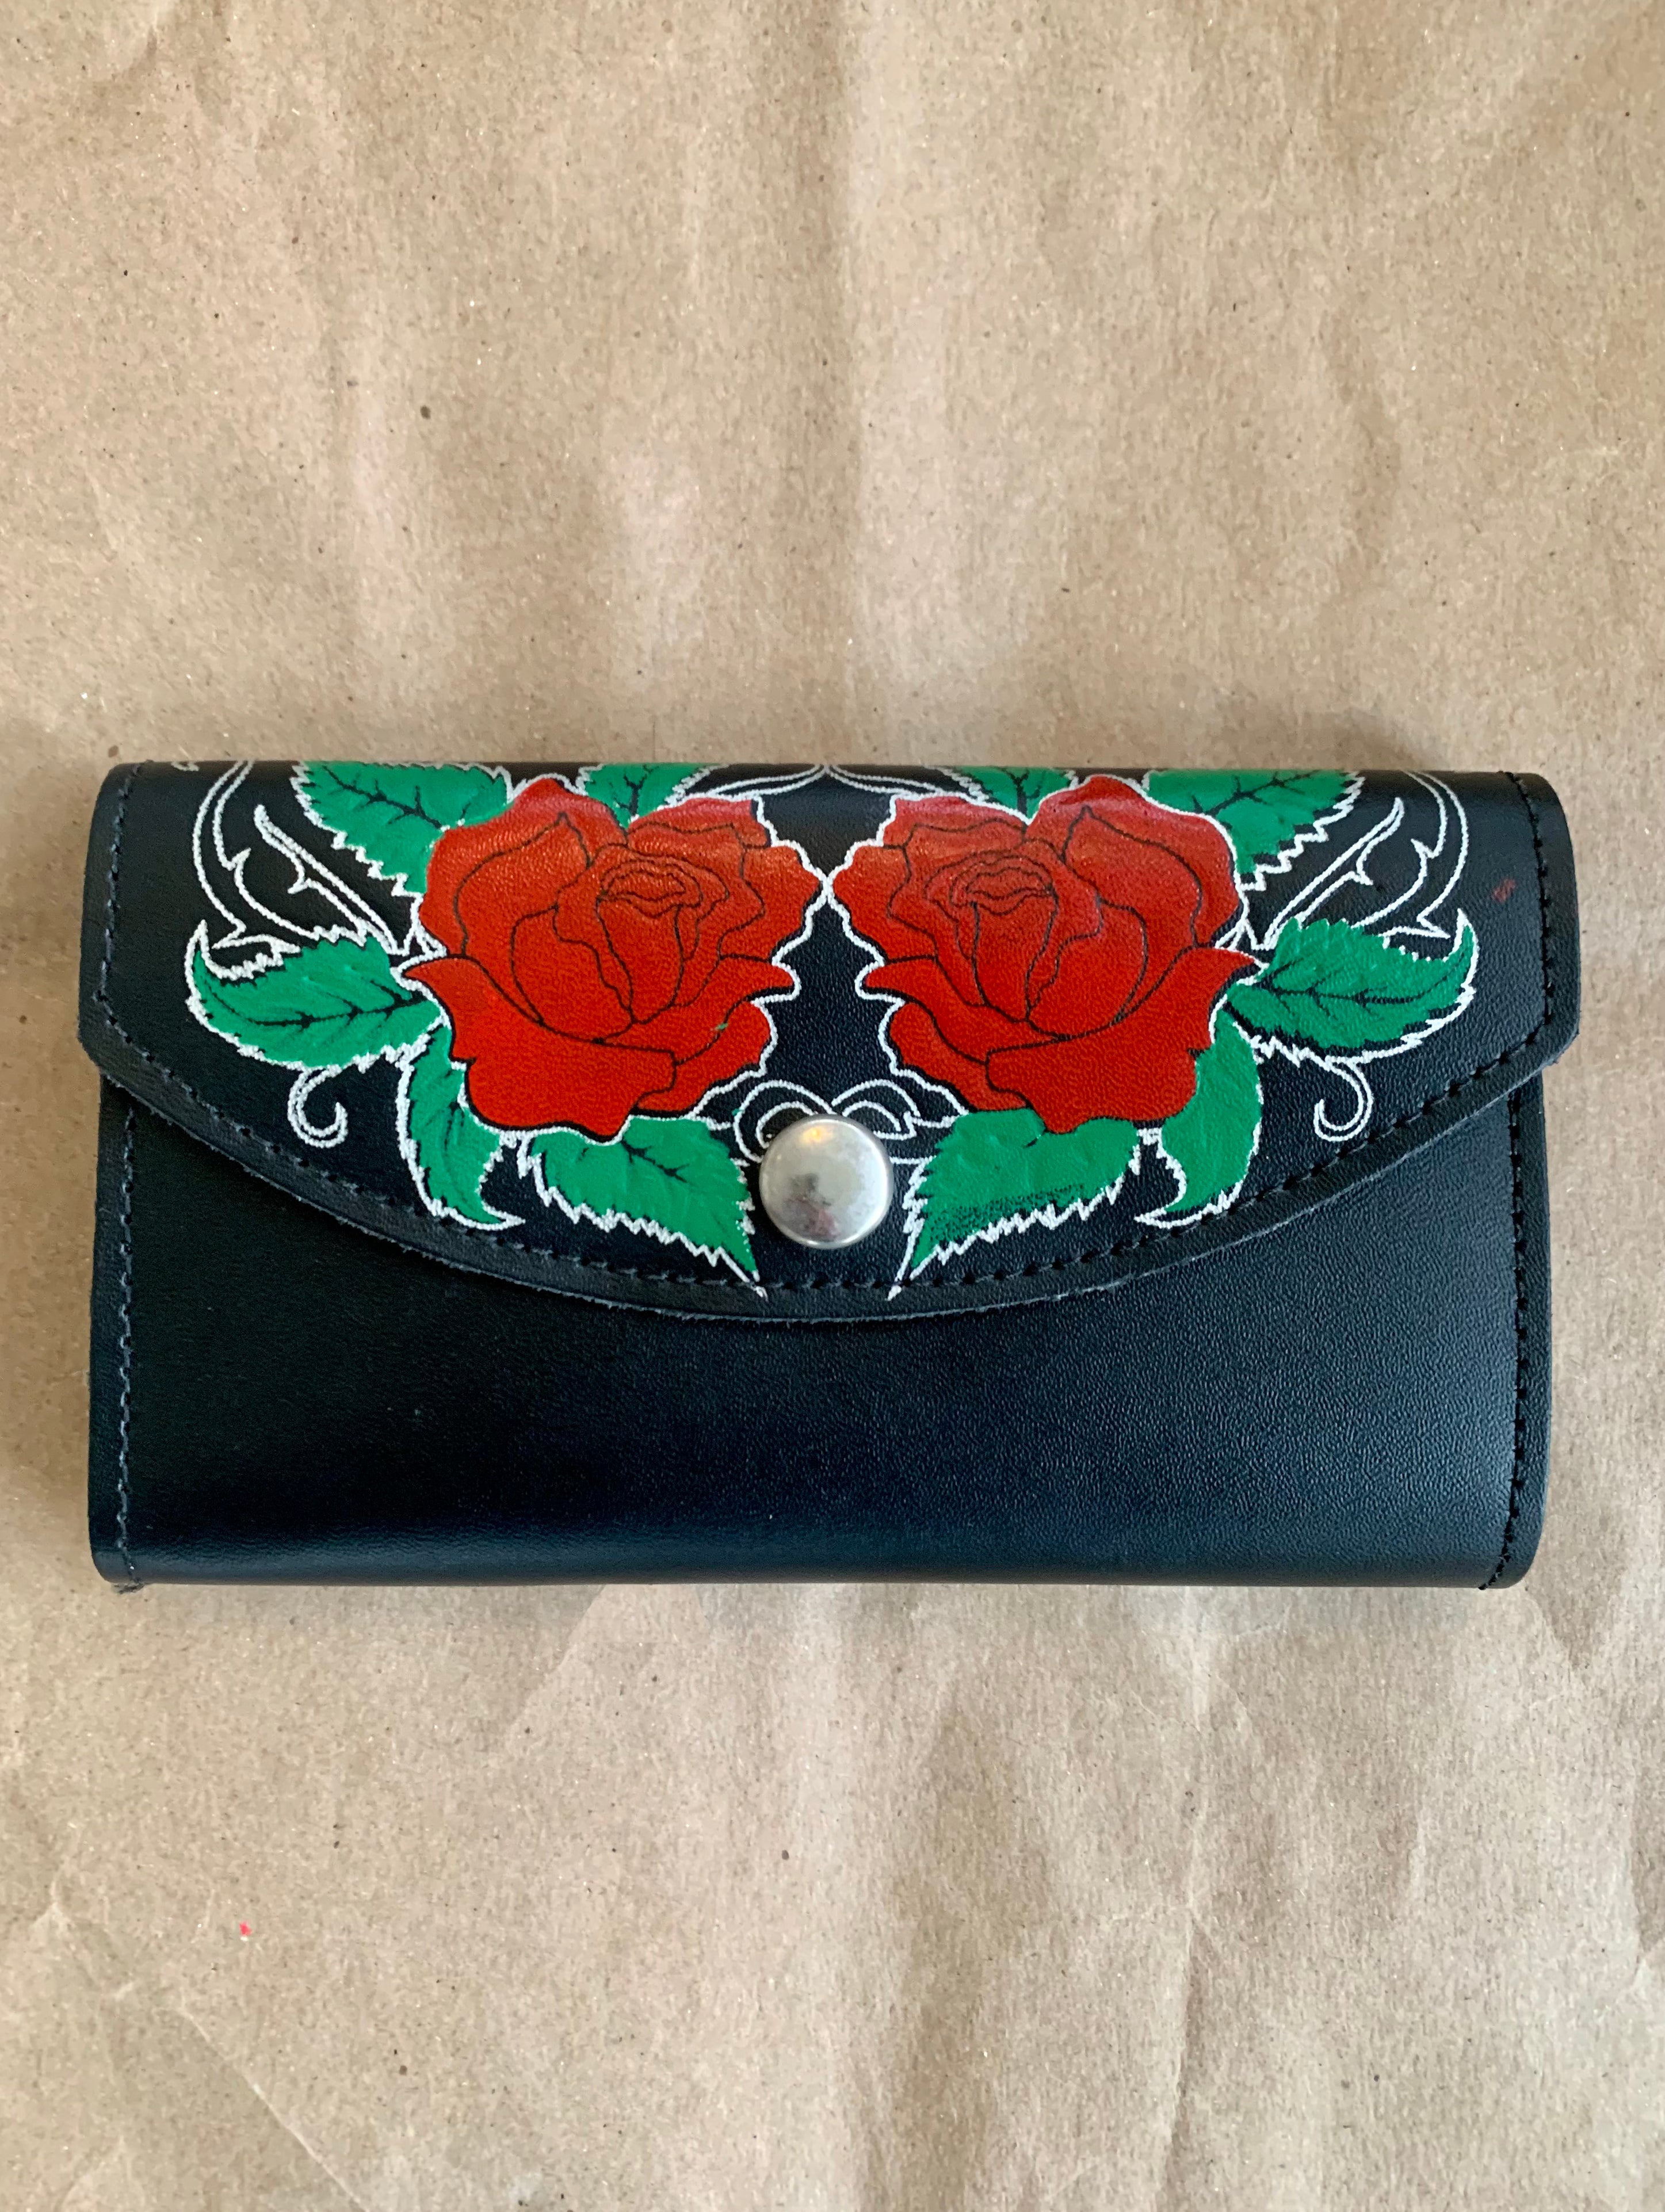 Carved and painted leather clutch wallet - the inside was almost harder  than the outside : r/crafts